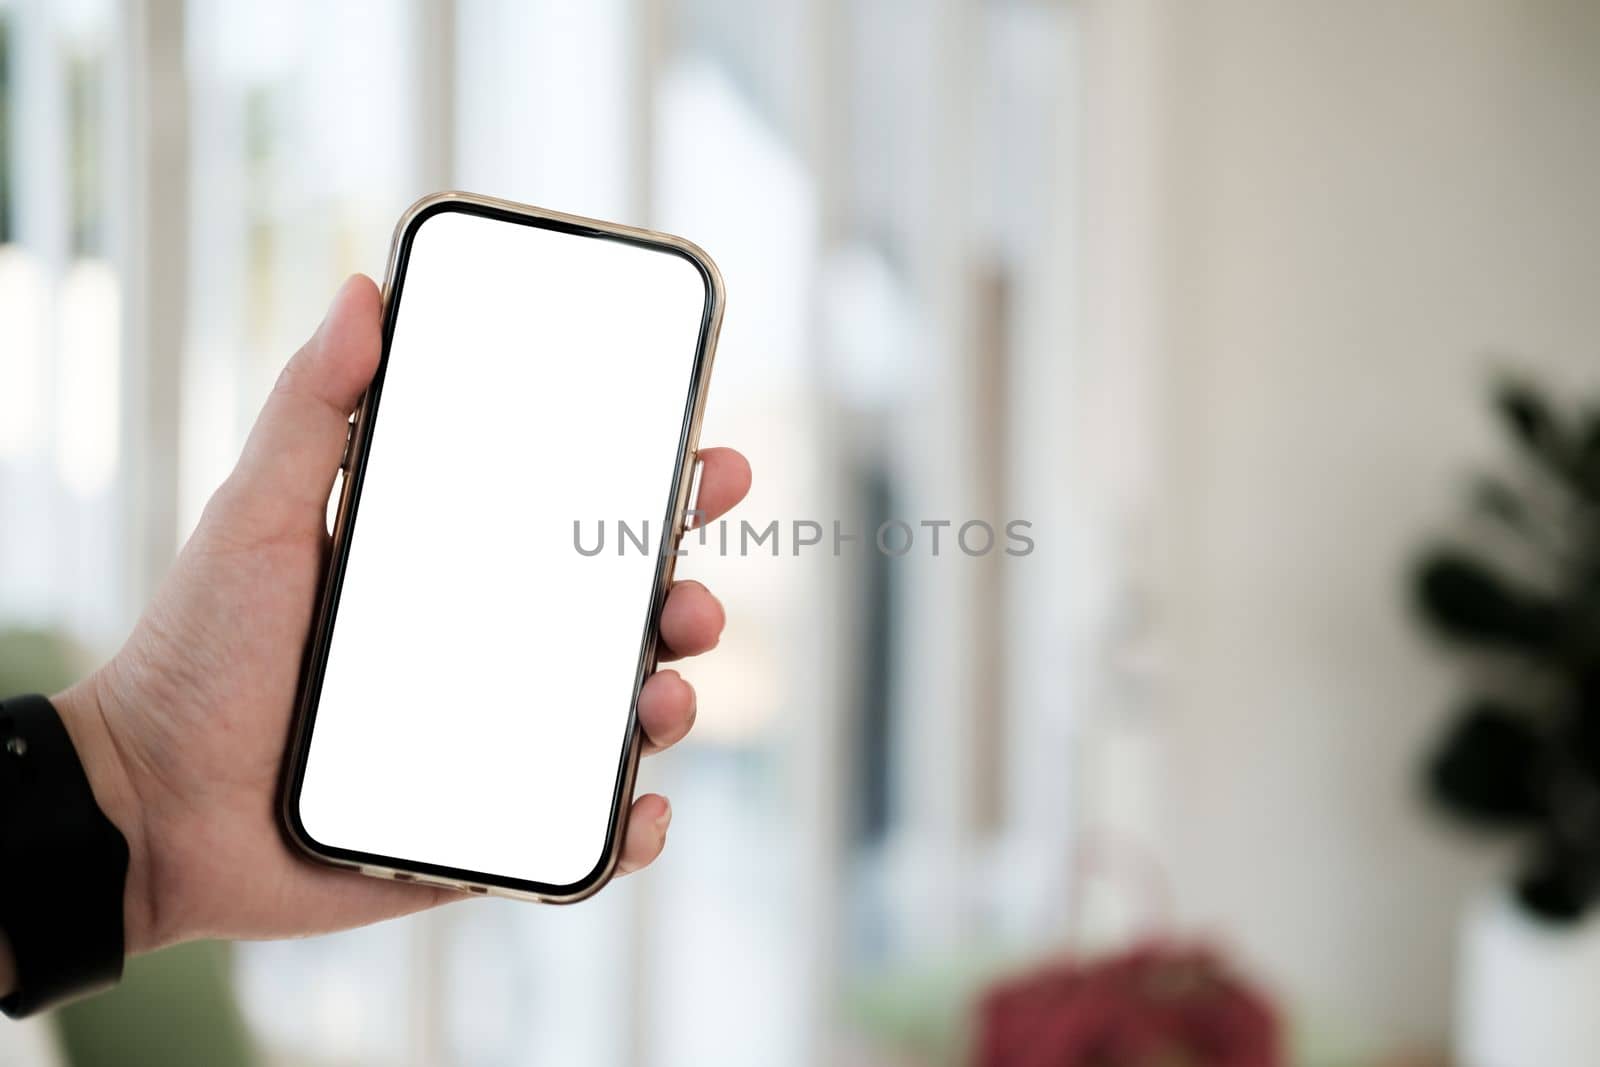 Mock up phone in woman hand showing white screen. Mobile phone white screen is blank the background is blurred.